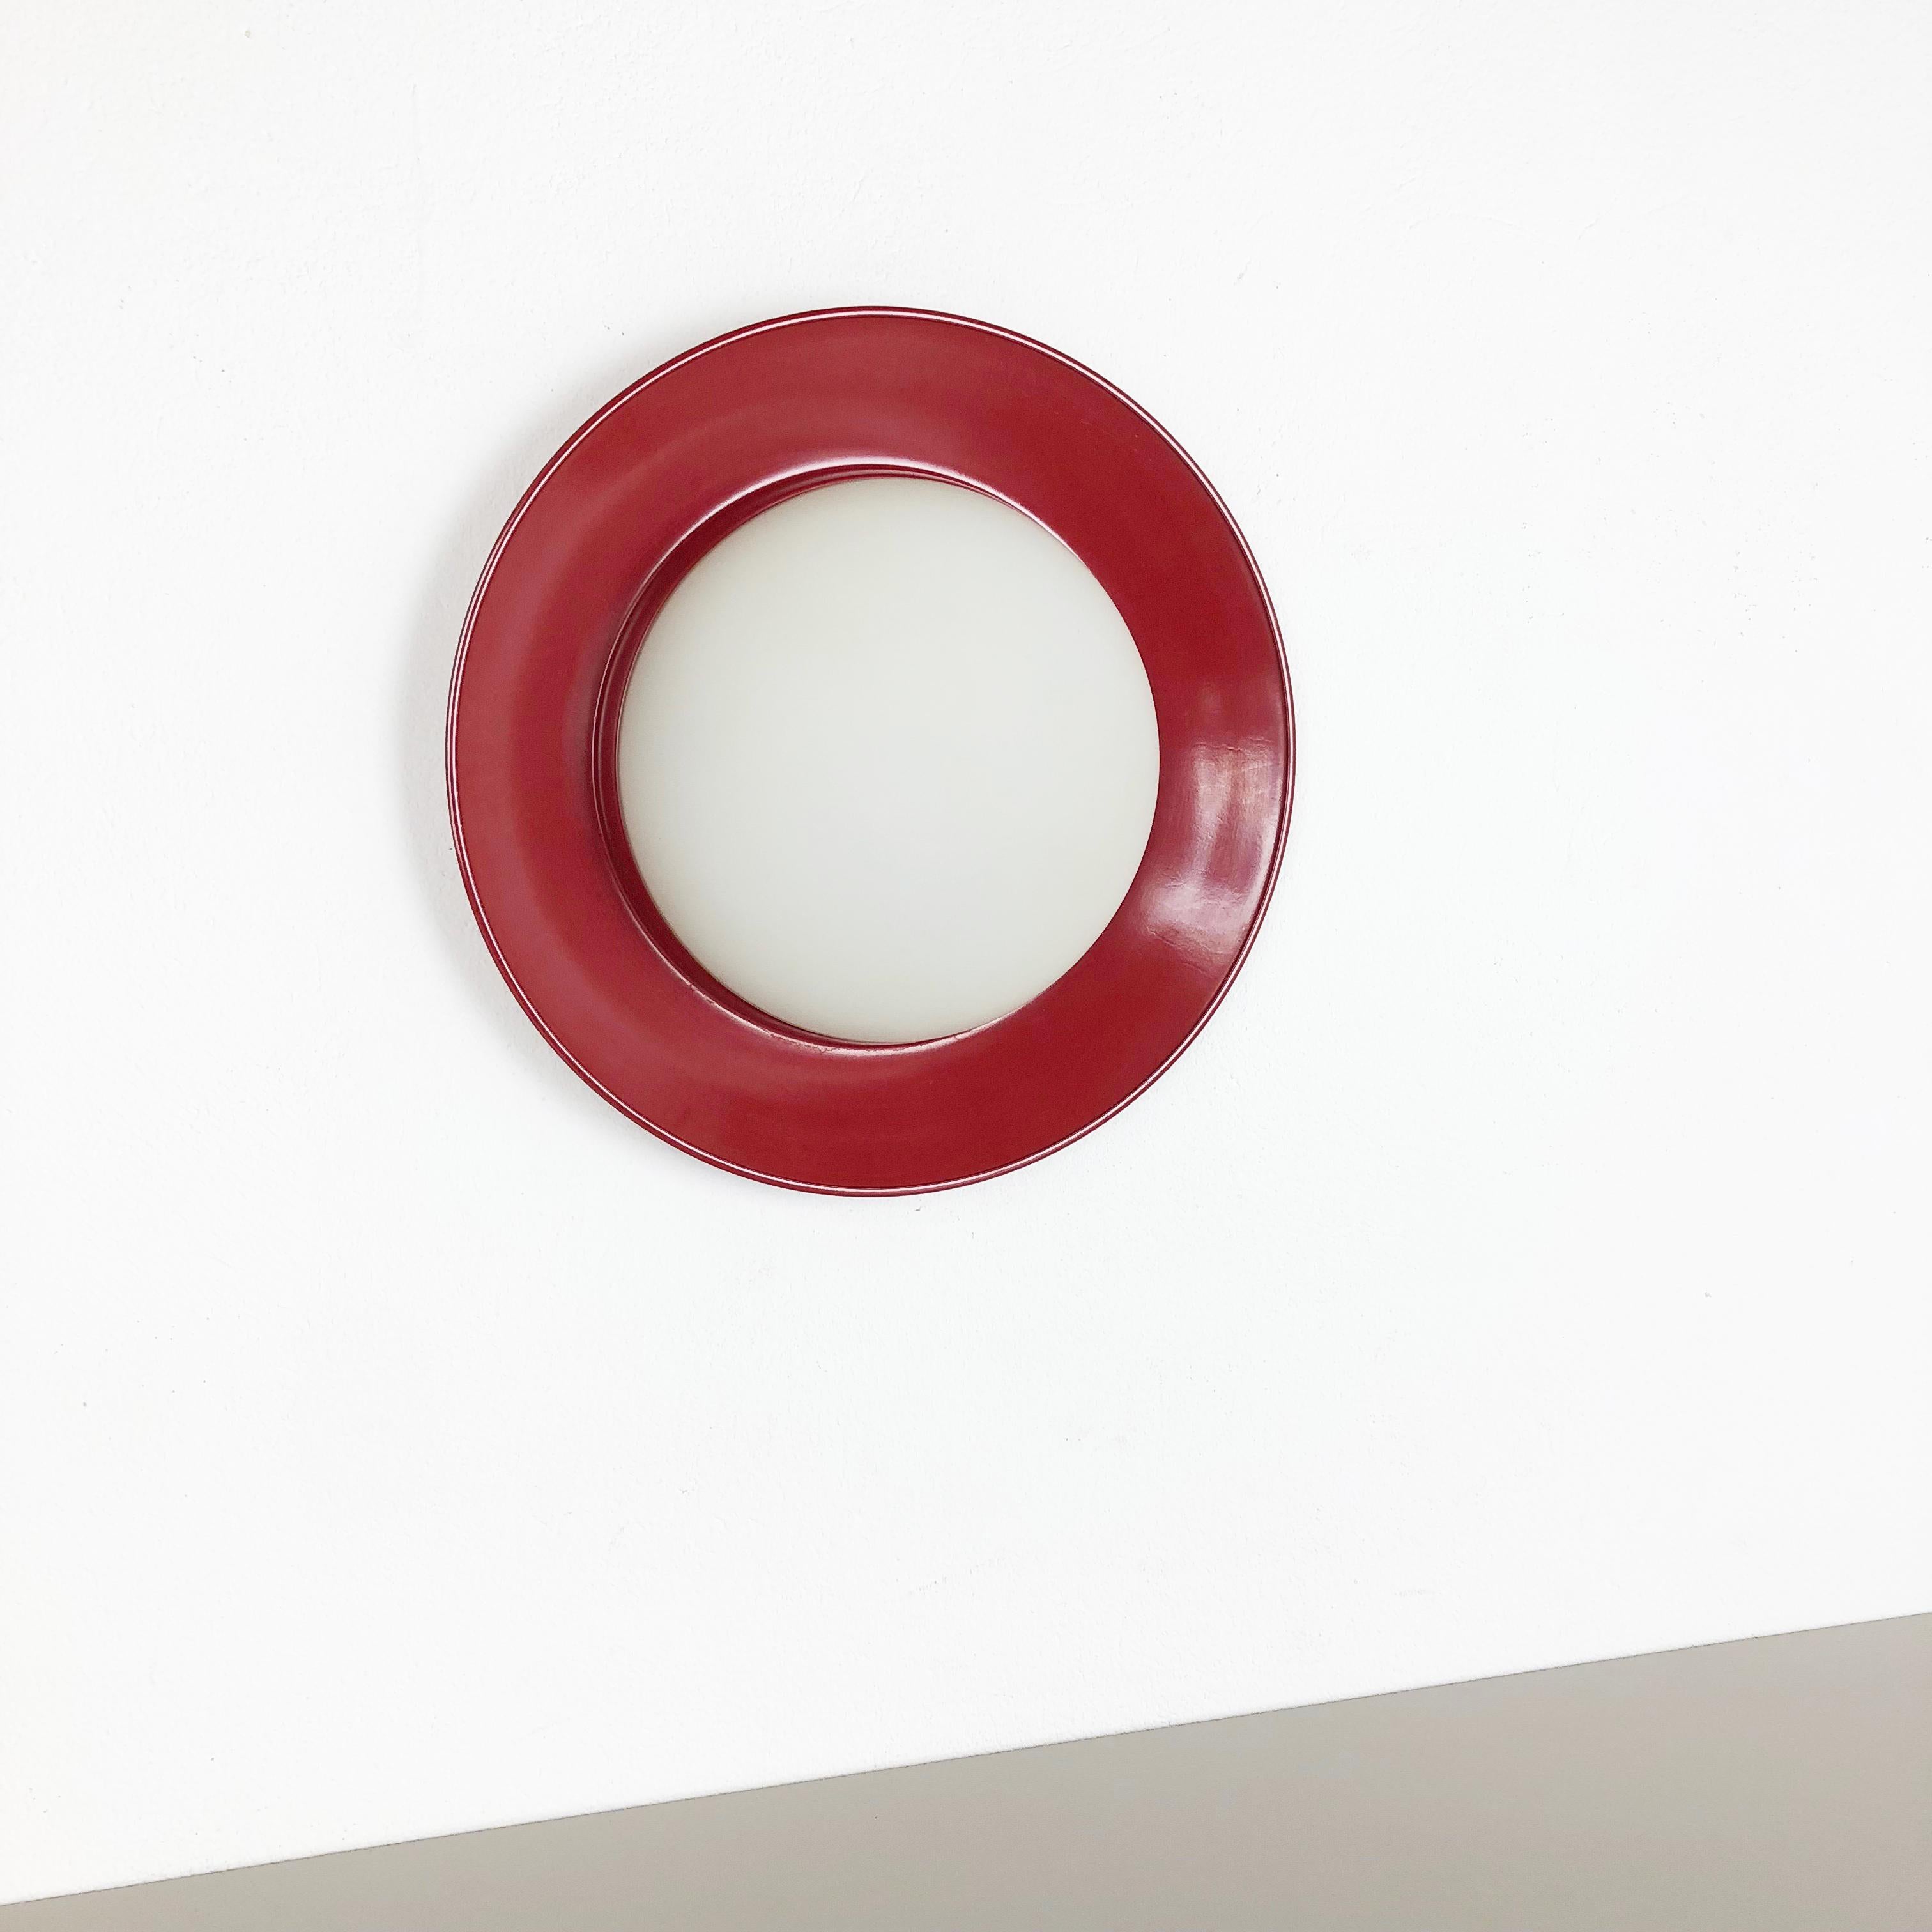 Article:

wall light


Producer:

HOSO  Hofmeister and Son; Germany


Origin:

Germany


Age:

1950s


Material:

Bakelite, Metal, satin Glass




This modernist light was produced by HOSO Light (Hoffmeister and Son) in Germany in the 1950s.